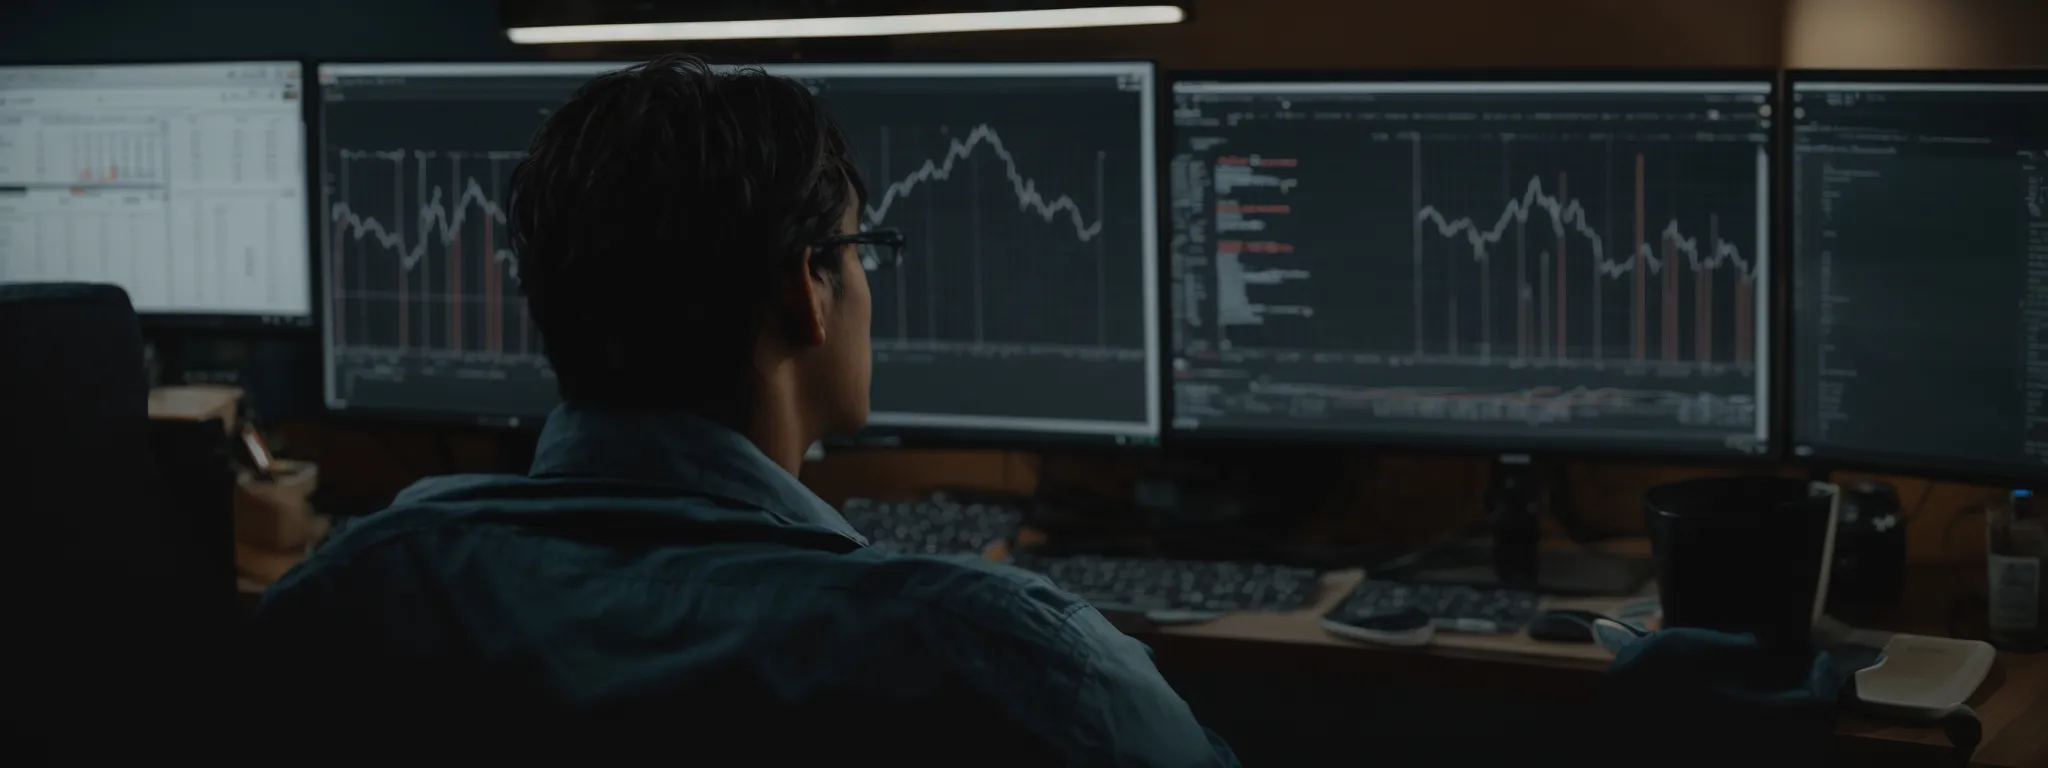 a person sitting at a computer with multiple browser tabs open displaying graphs and analytics.